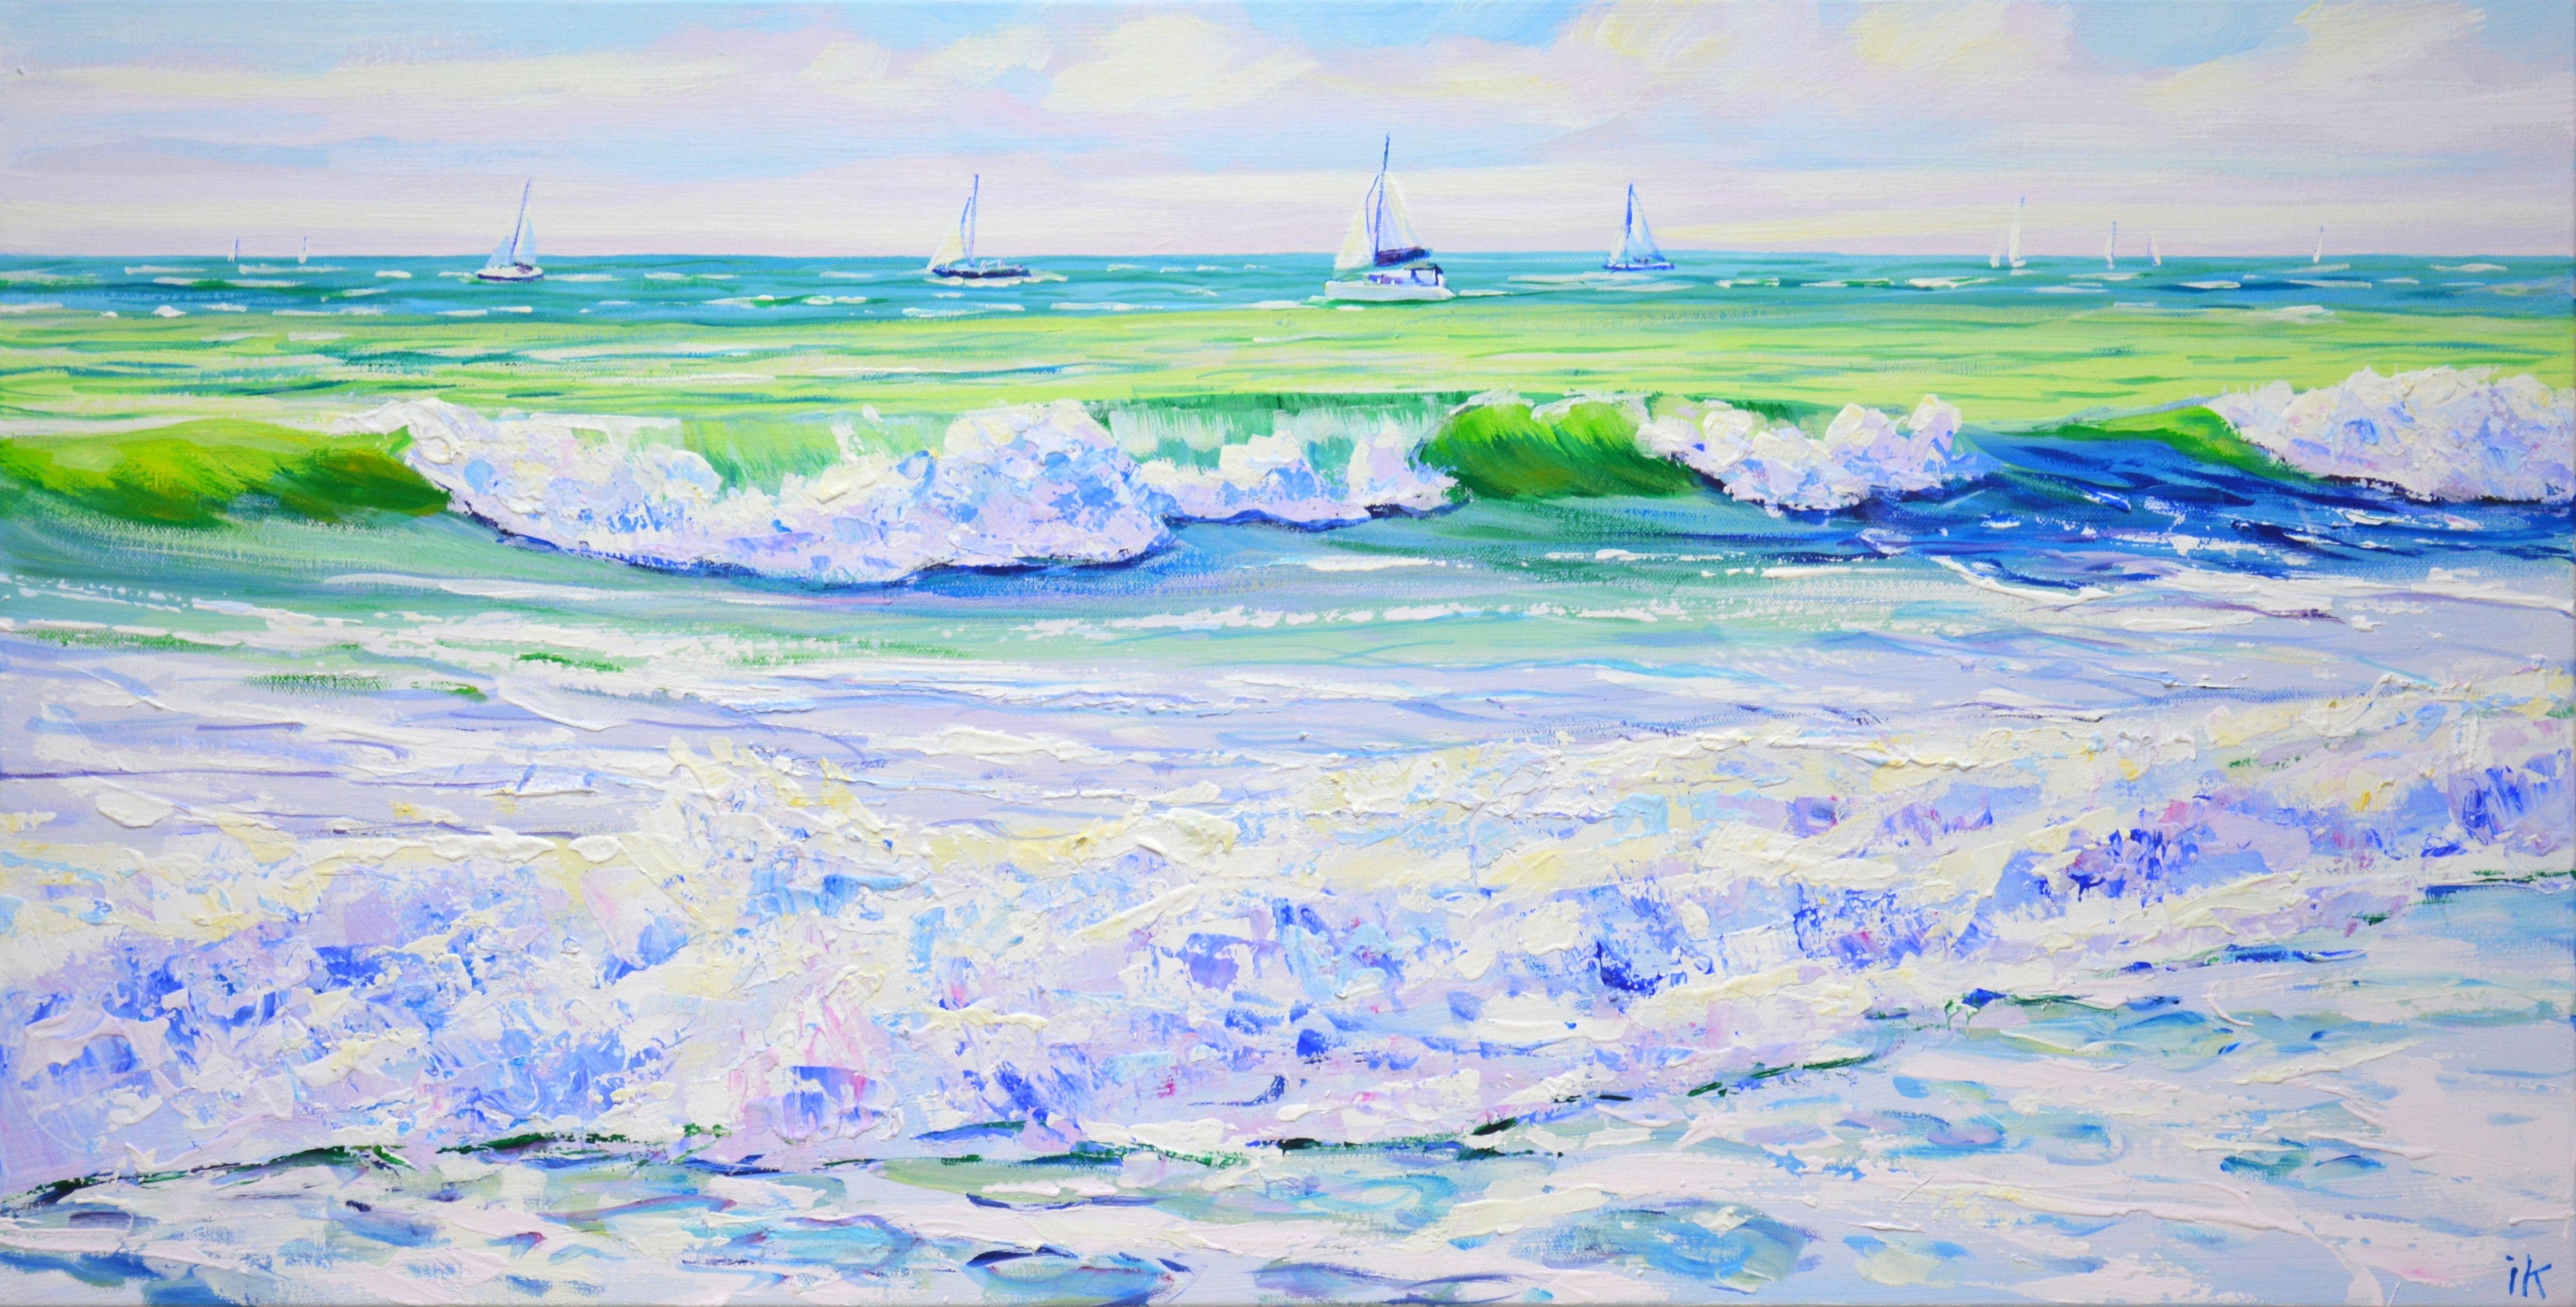 Artwork Sea.Sailboats. Waves. written with inspiration, positively. Nature: seascape, clear sky above the water, light reflected from the incoming waves, glare of the sun on the water, sea foam, sailboats on the water create an atmosphere of